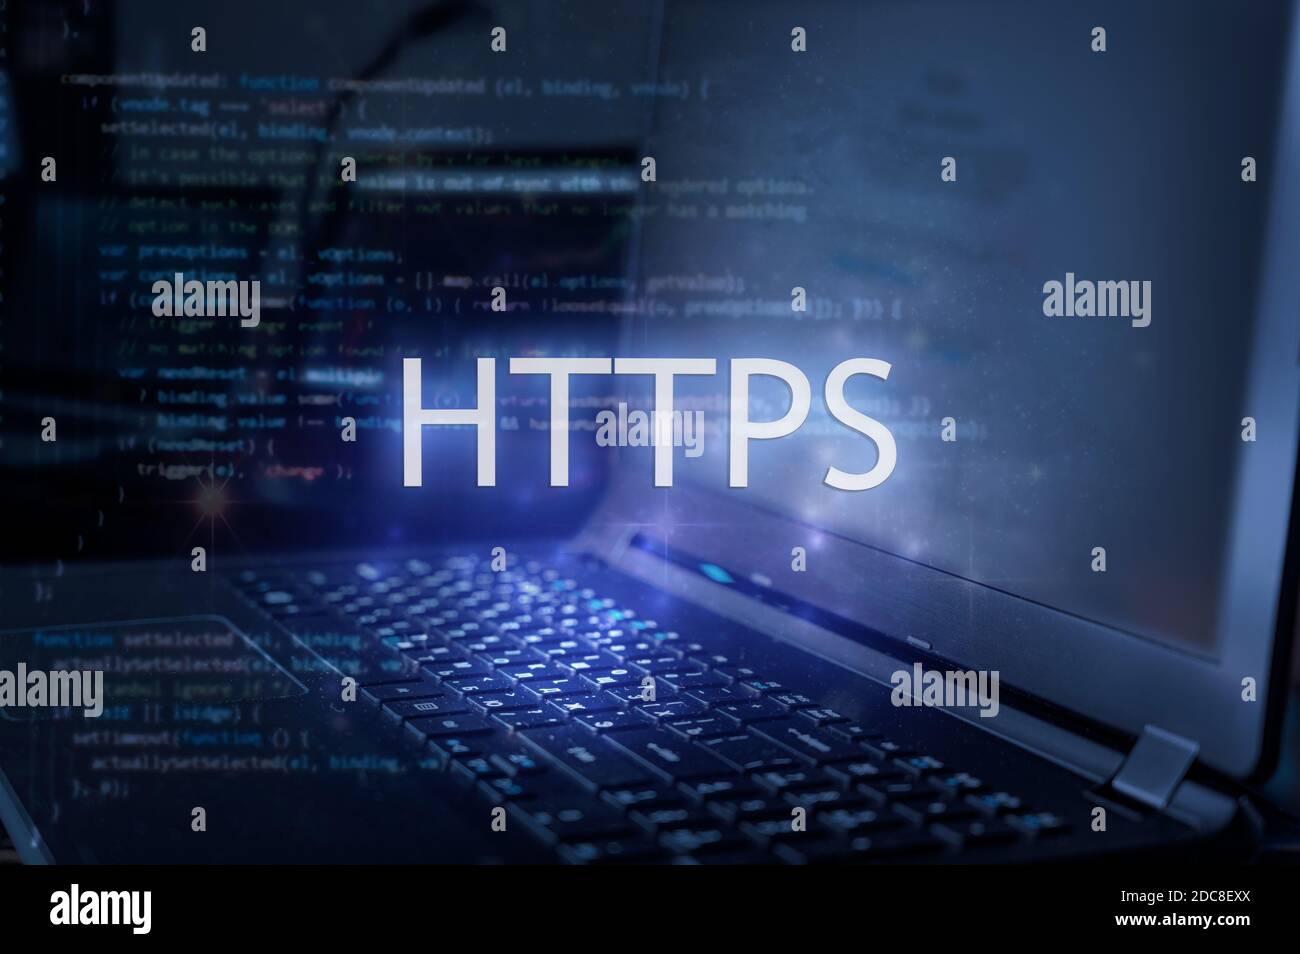 HTTPS inscription against laptop and code background.  Internet security concept. Stock Photo